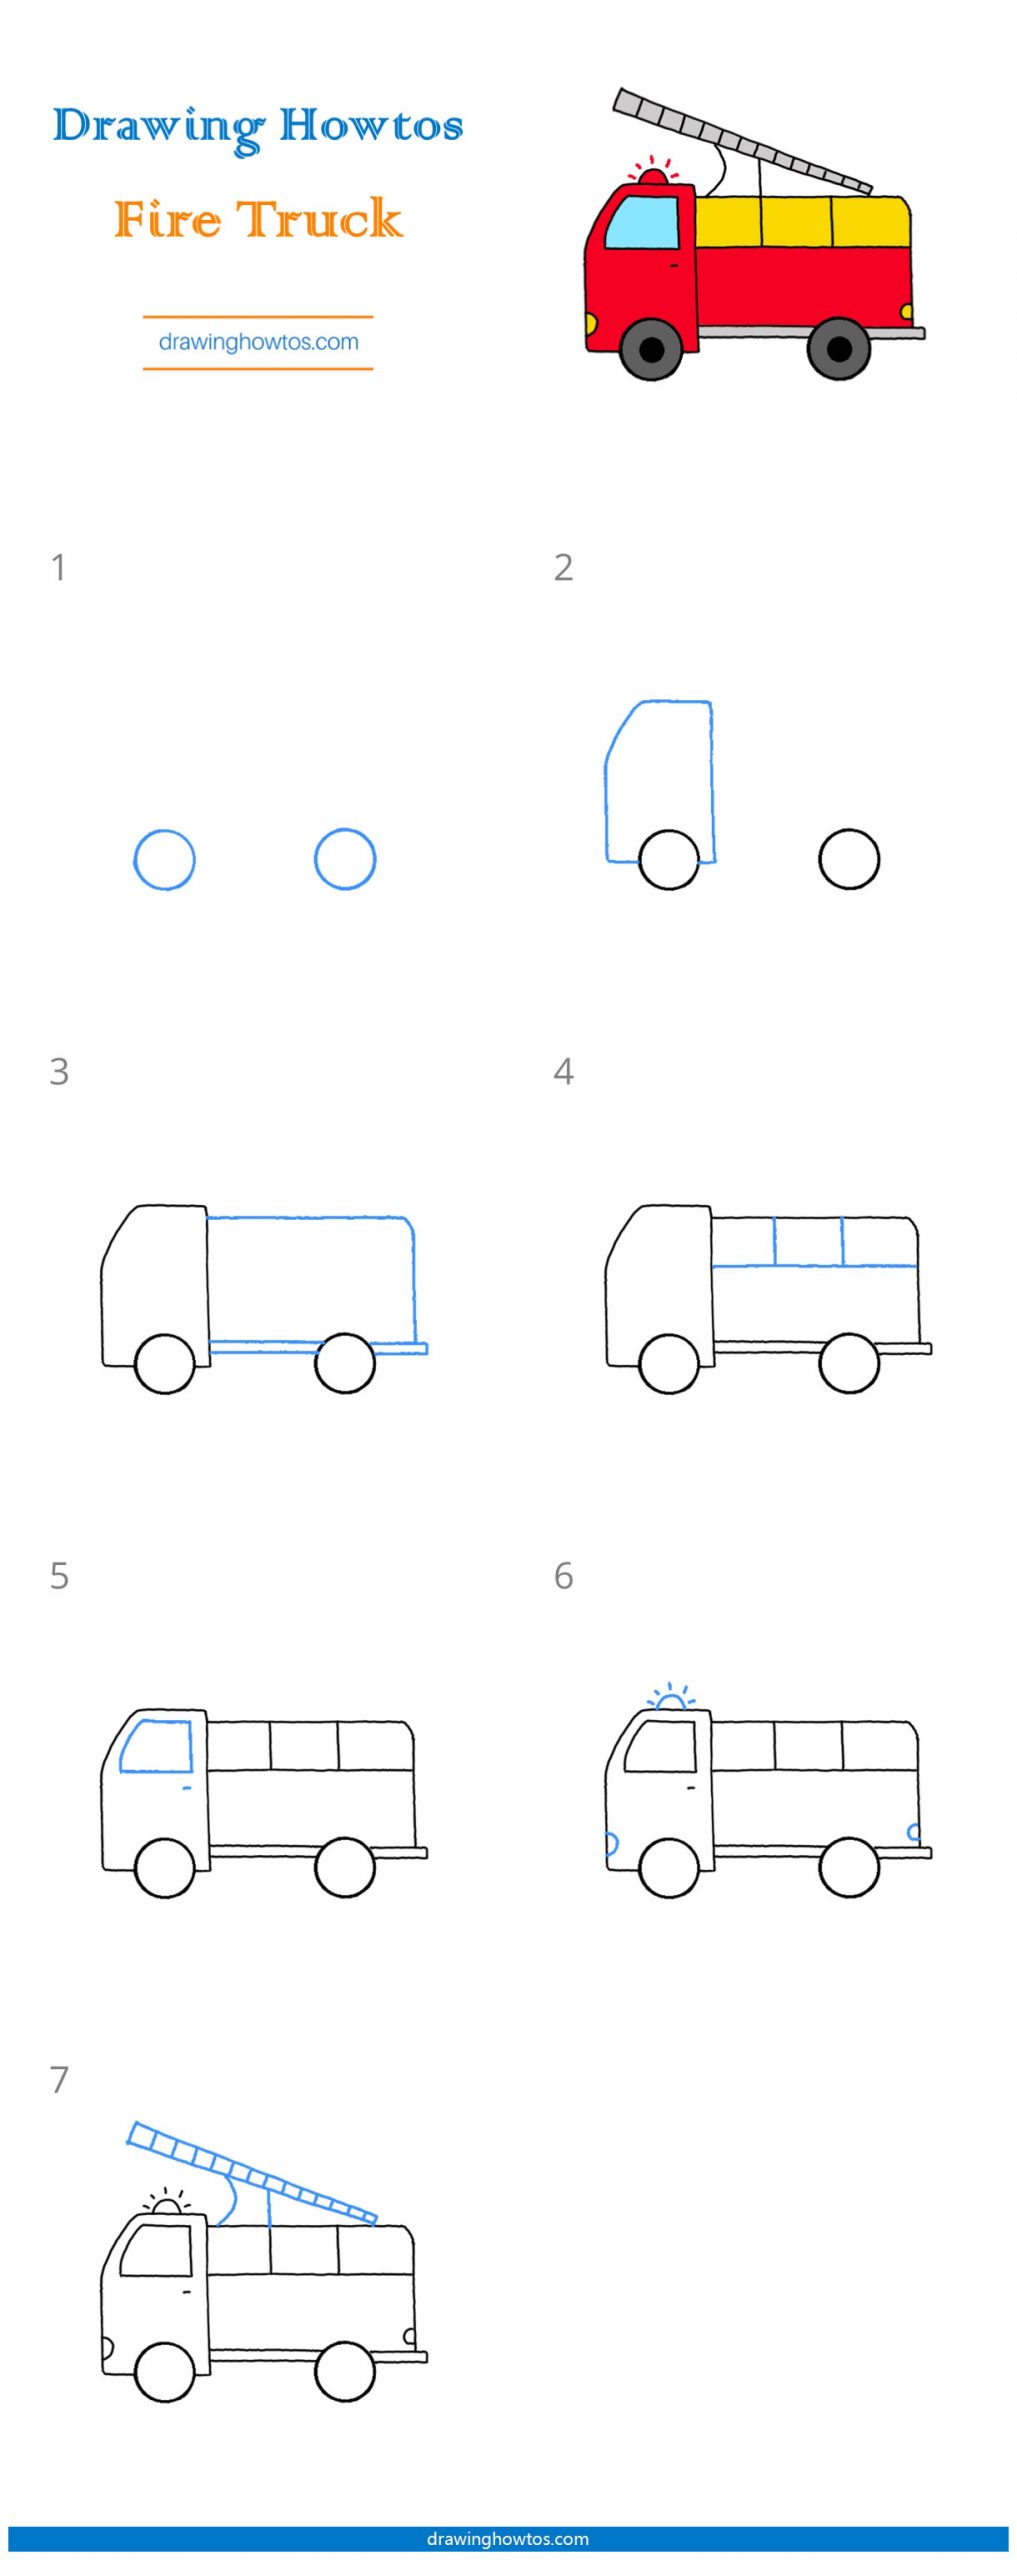 How to Draw a Fire Truck Step by Step